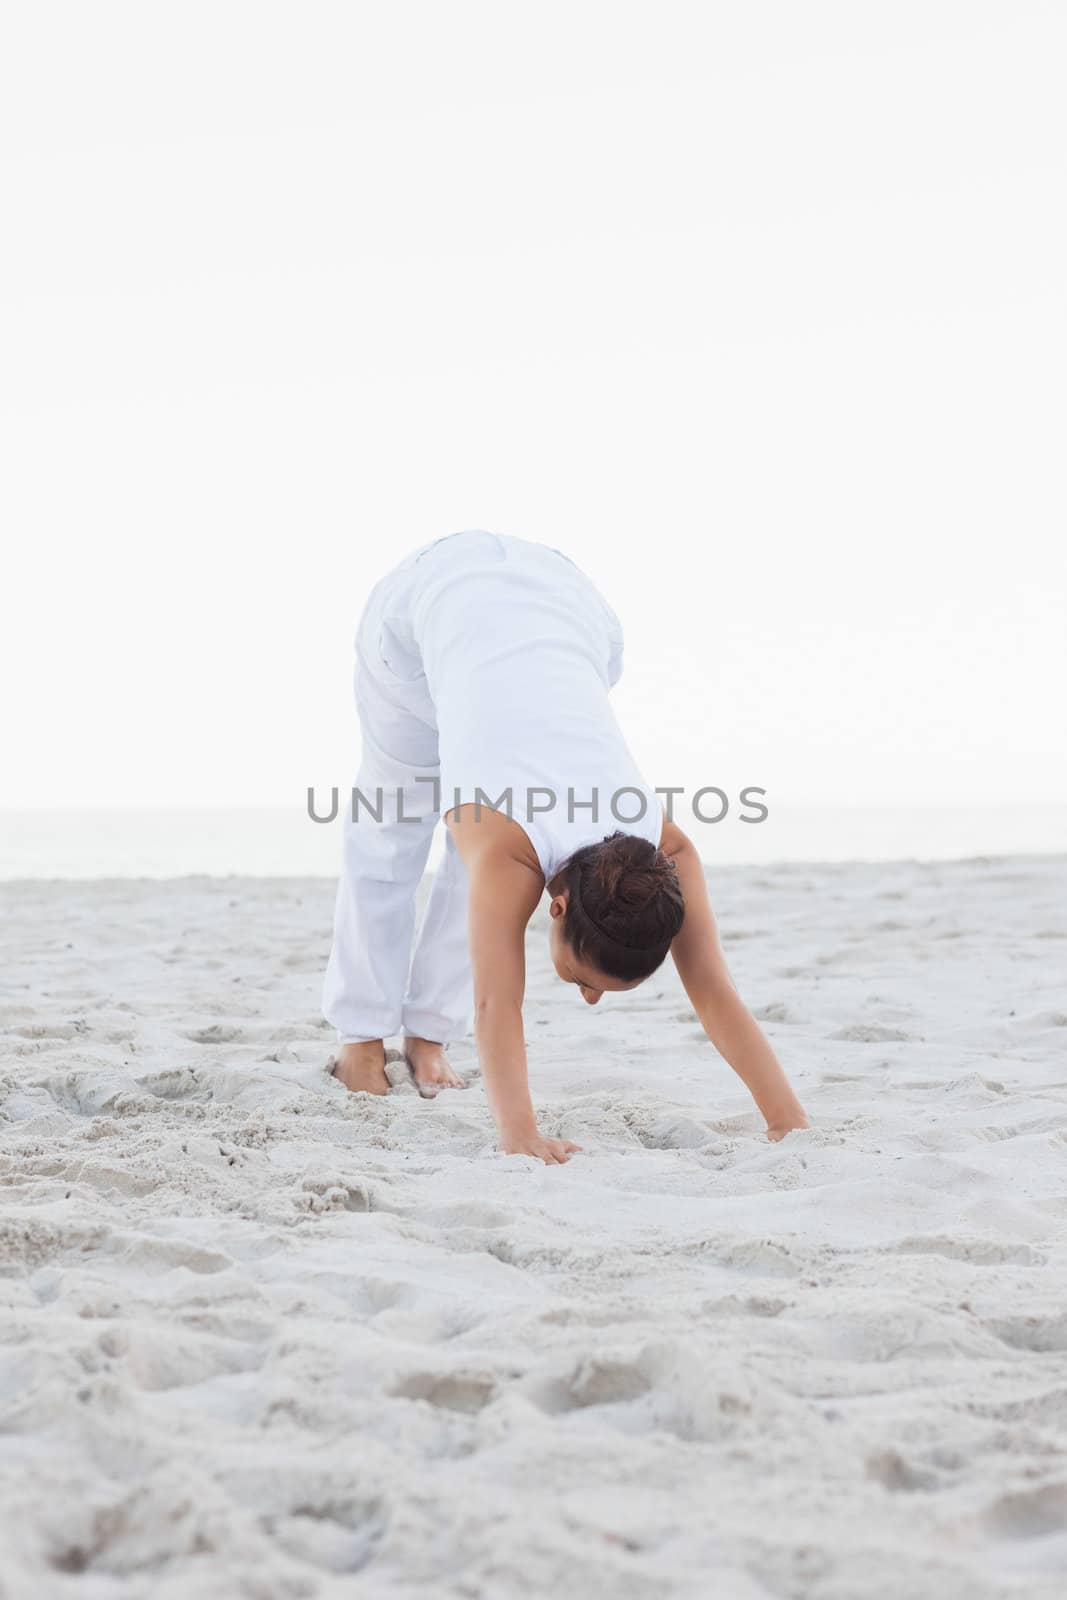 Woman doing extended triangle yoga pose at the beach